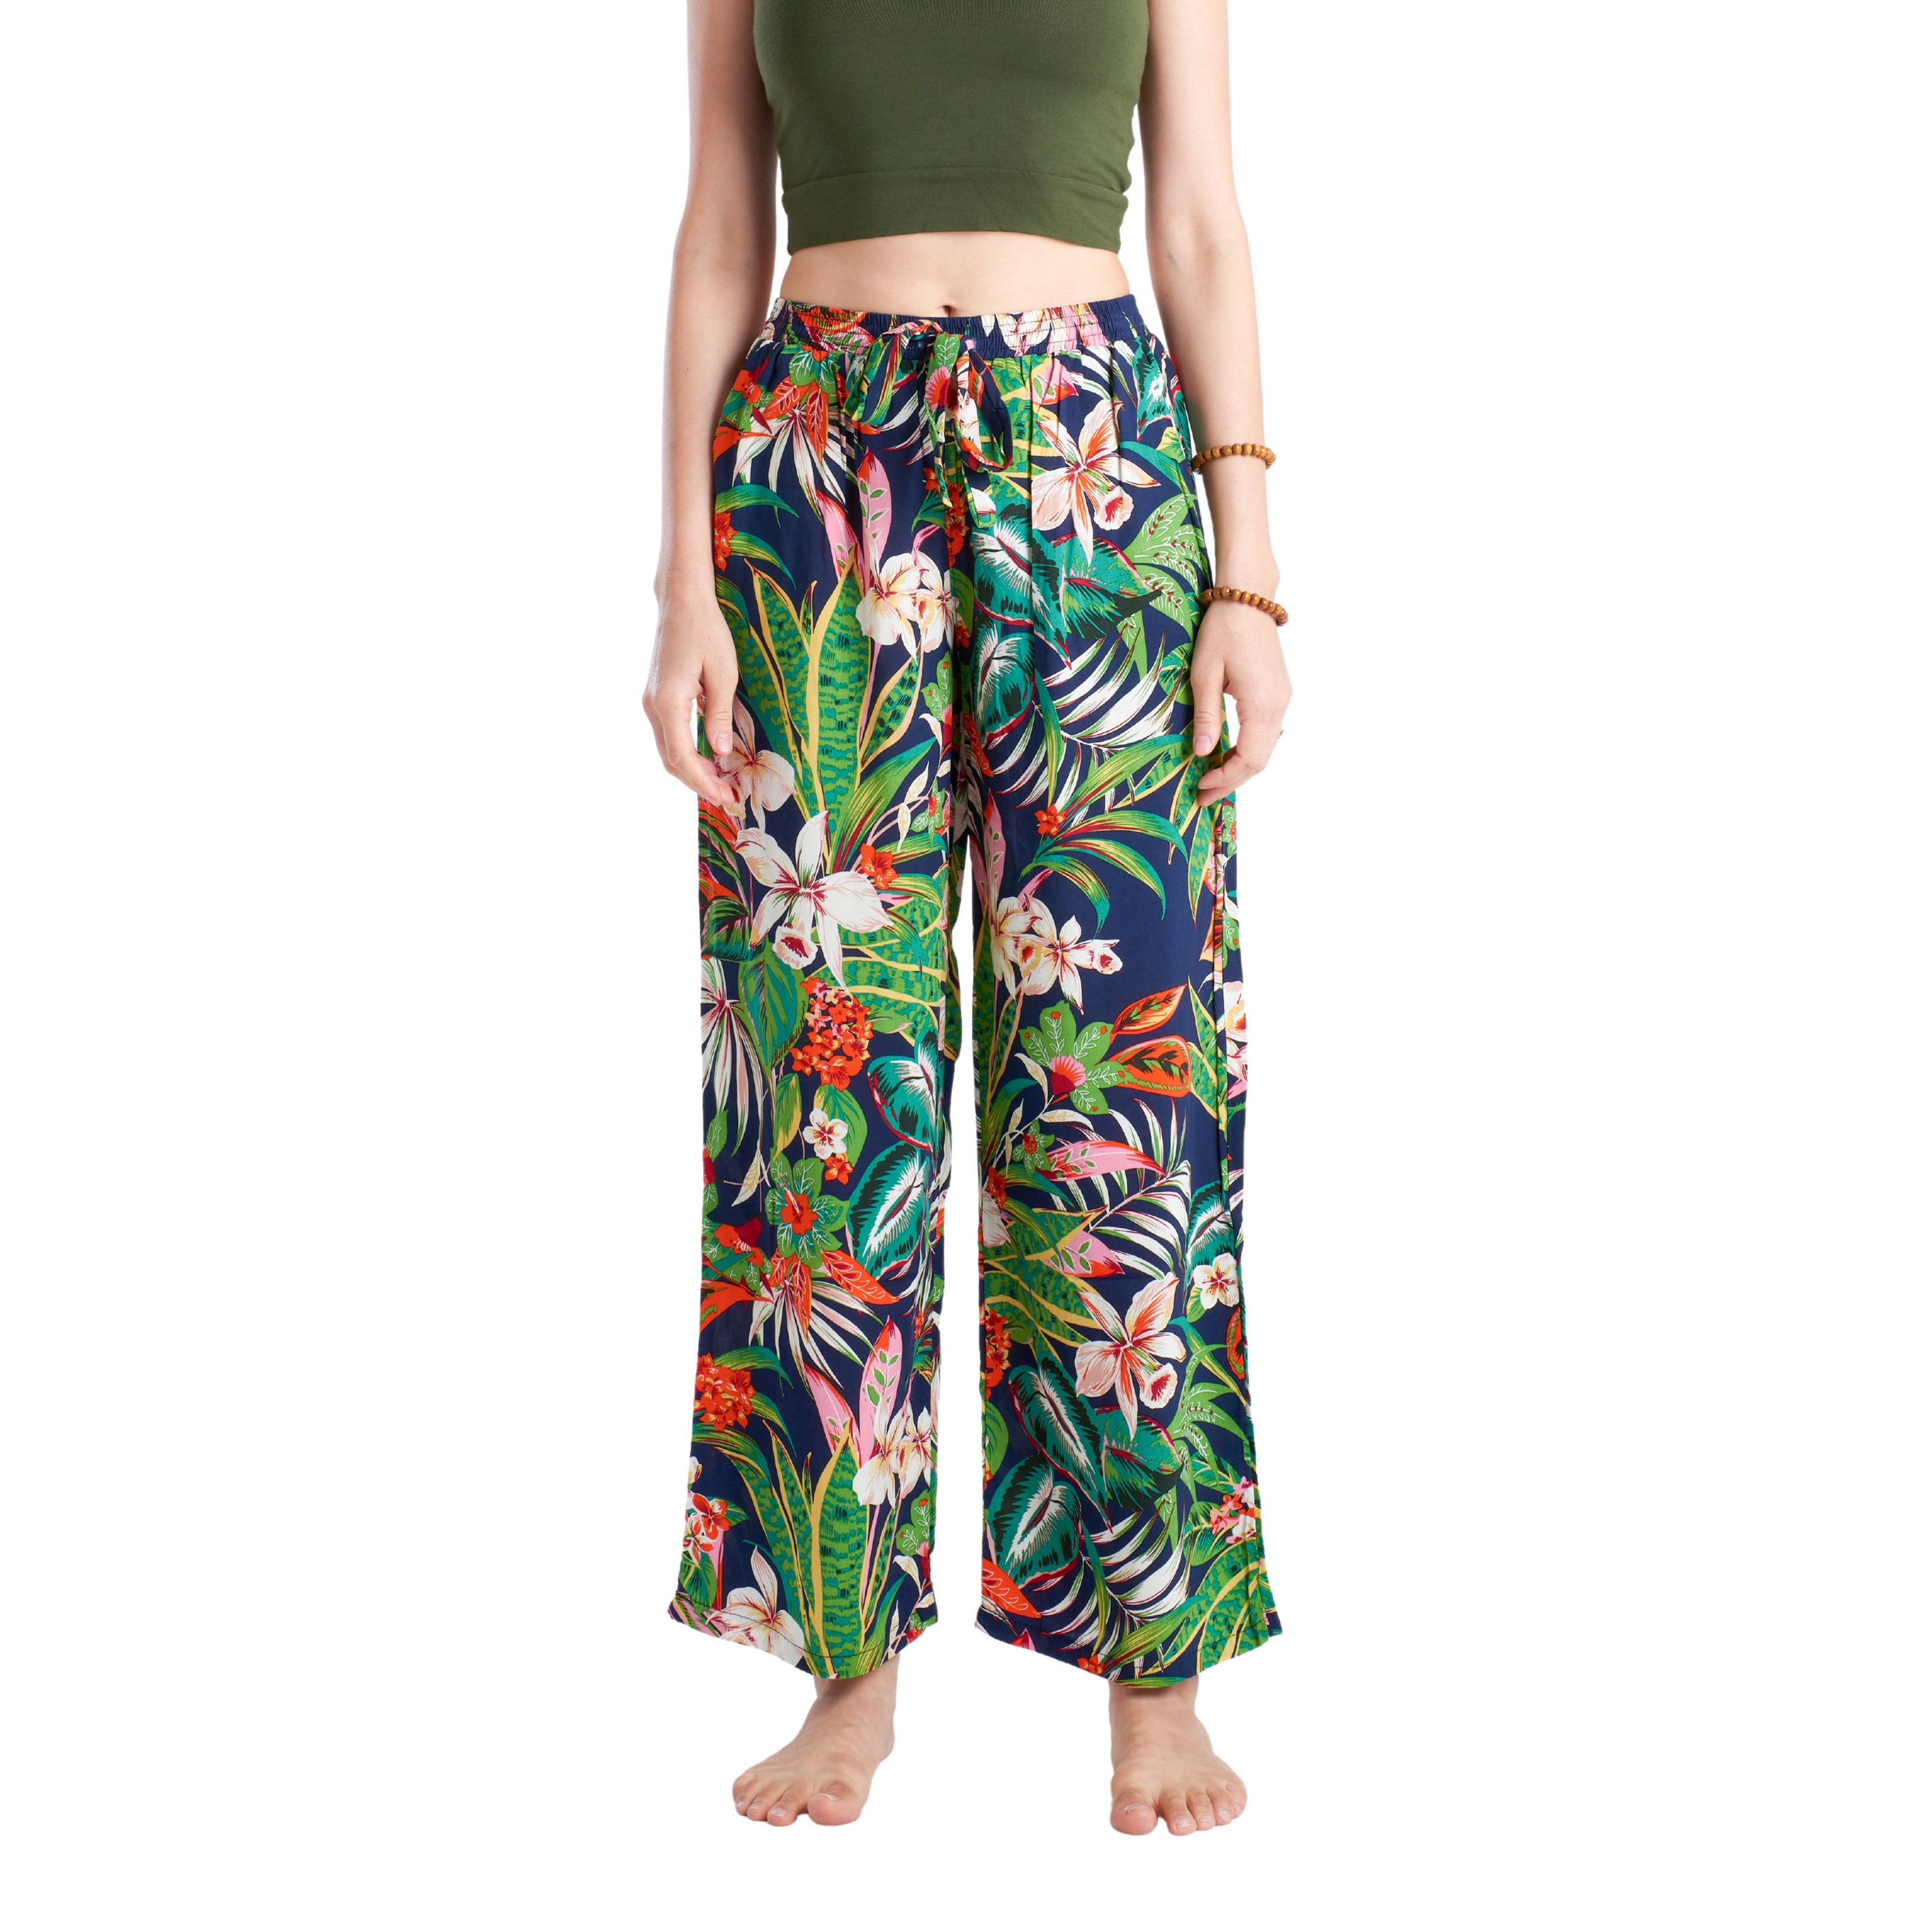 SELVA PANTS Elepanta Casual Pants - Buy Today Elephant Pants Jewelry And Bohemian Clothes Handmade In Thailand Help To Save The Elephants FairTrade And Vegan